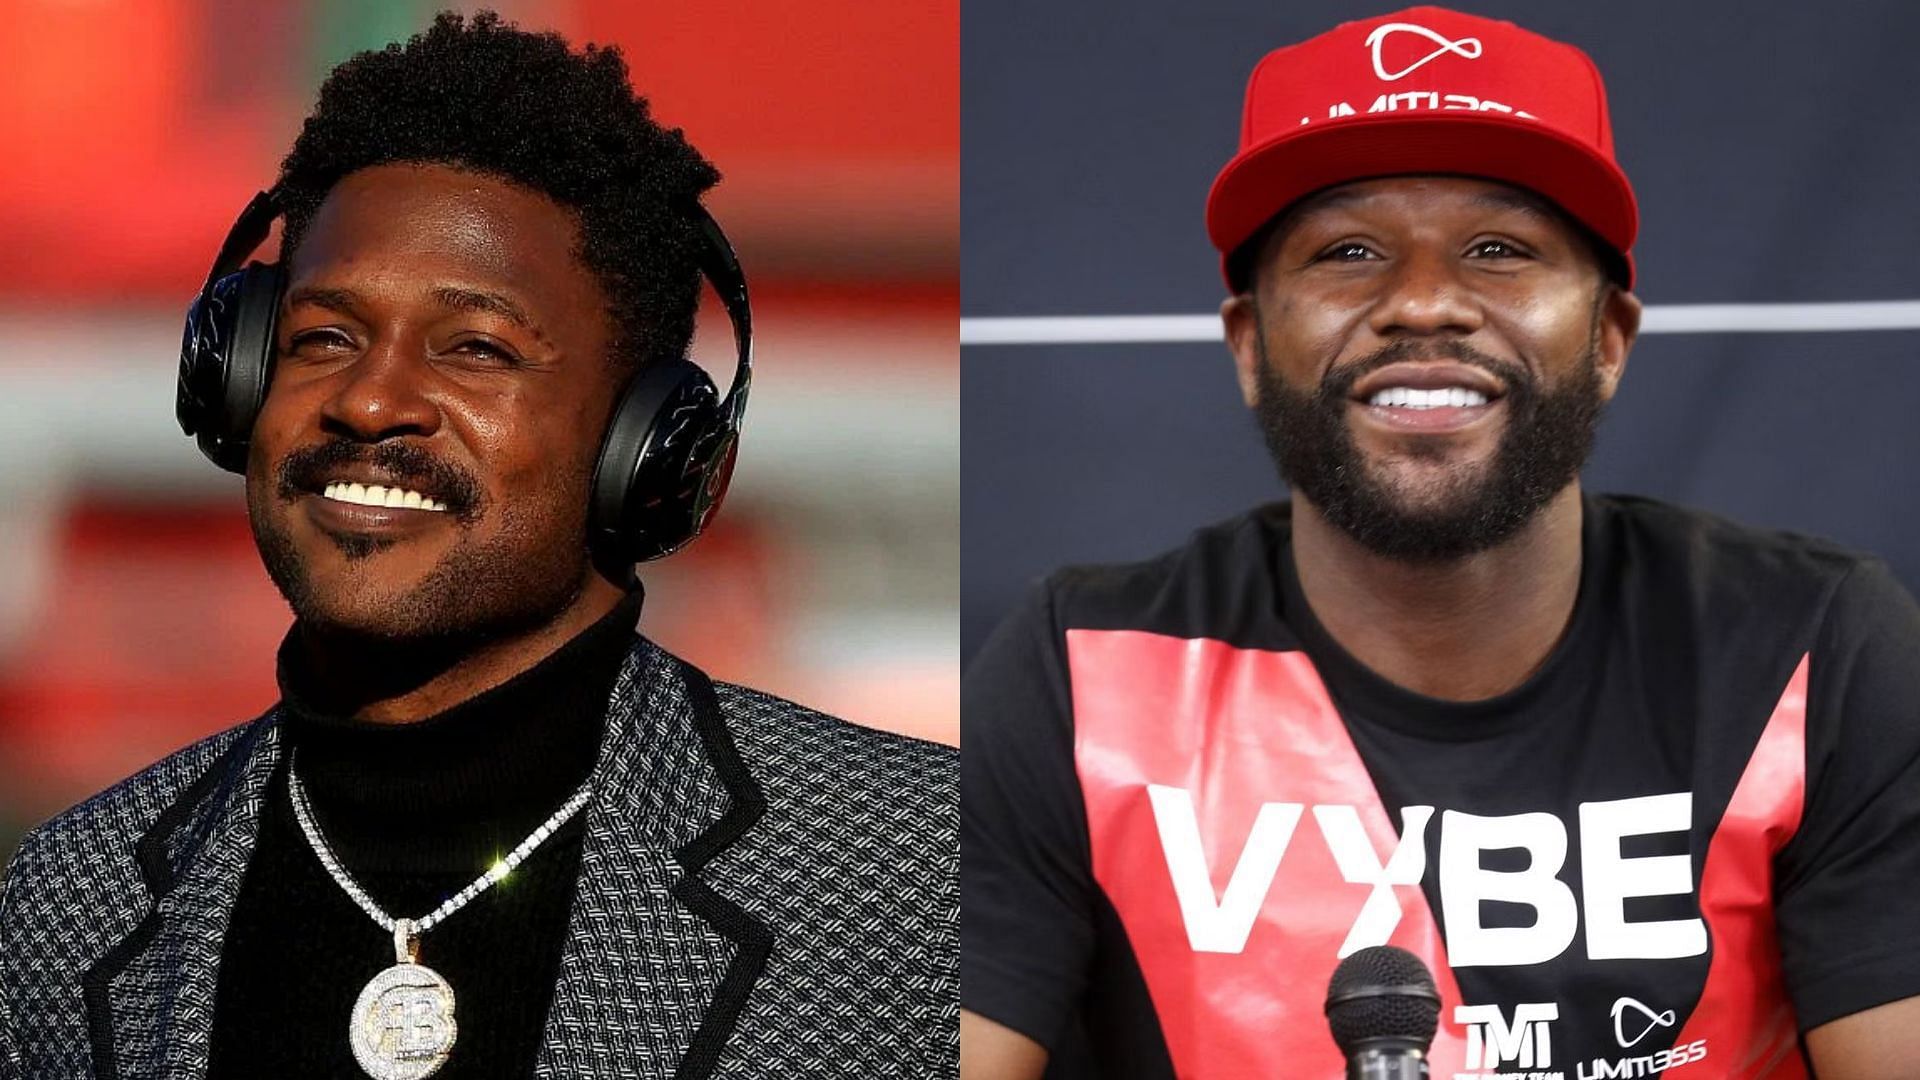 Antonio Brown may have ended his feud with Floyd Mayweather Jr after a recent Instagram post.